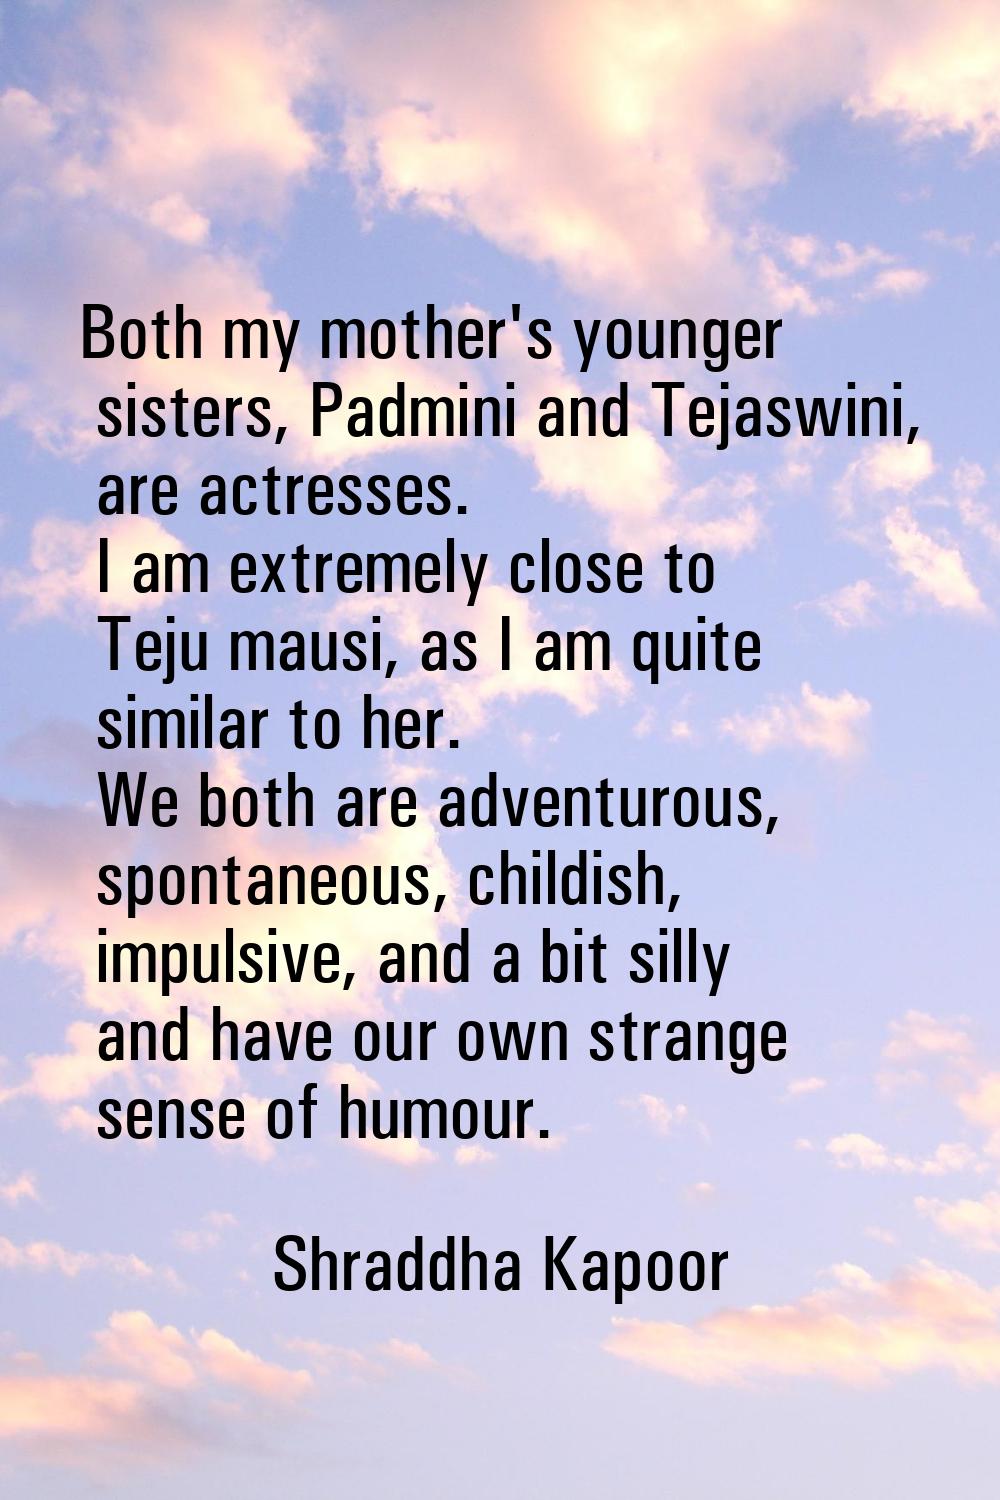 Both my mother's younger sisters, Padmini and Tejaswini, are actresses. I am extremely close to Tej